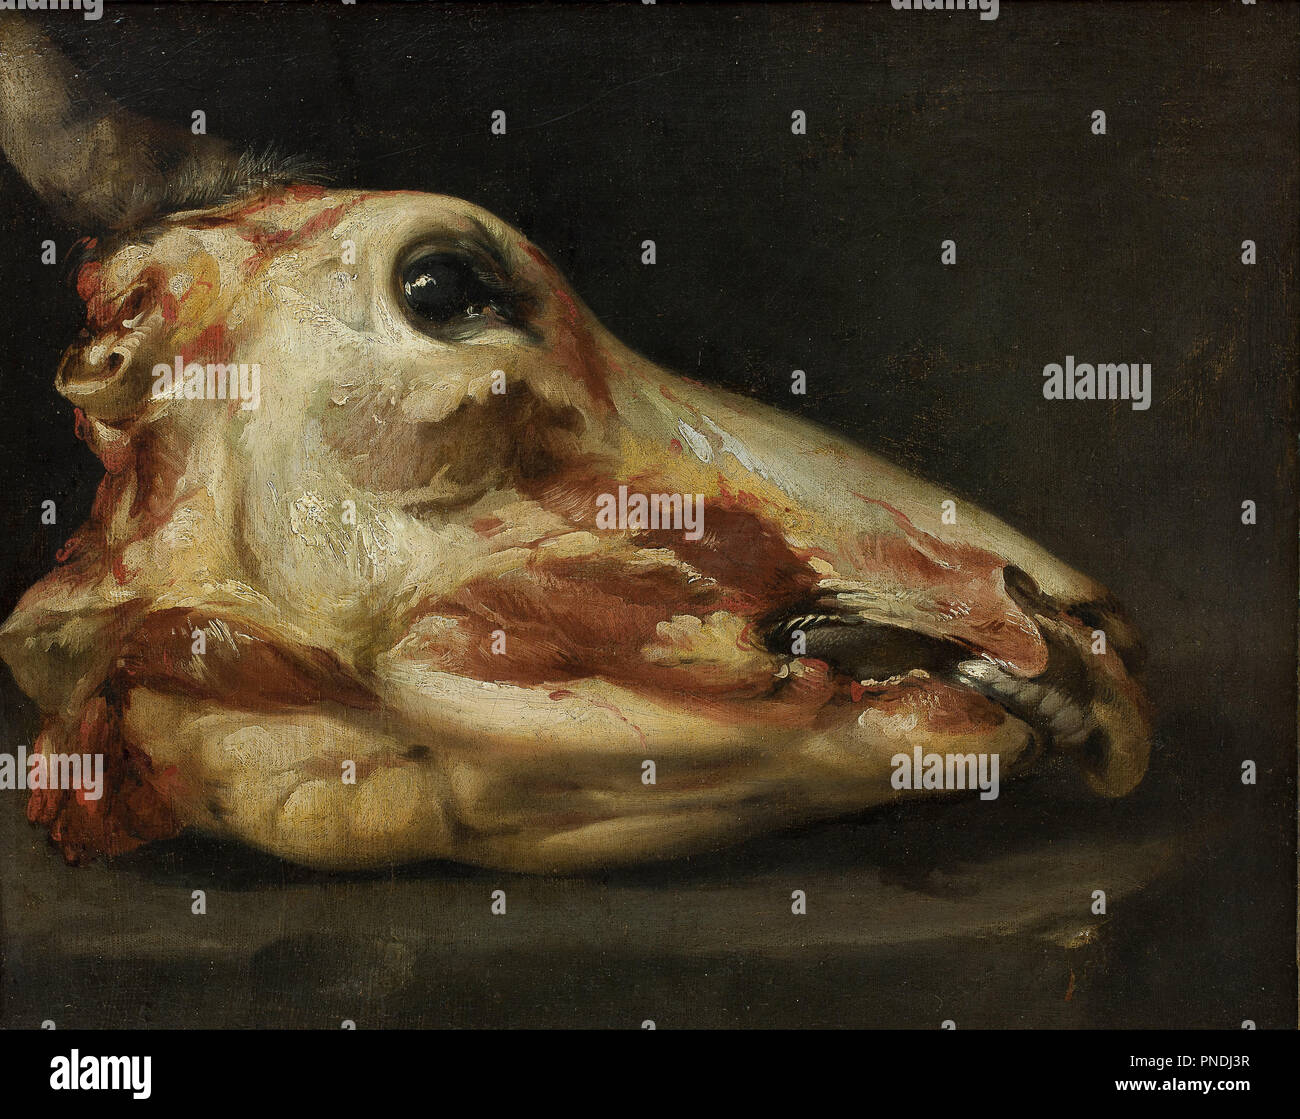 Skinned Head of a Young Bull. Date/Period: Ca. 1690. Painting. Oil on canvas. Height: 571 mm (22.48 in); Width: 706 mm (27.79 in). Author: FELICE BOSELLI. Stock Photo